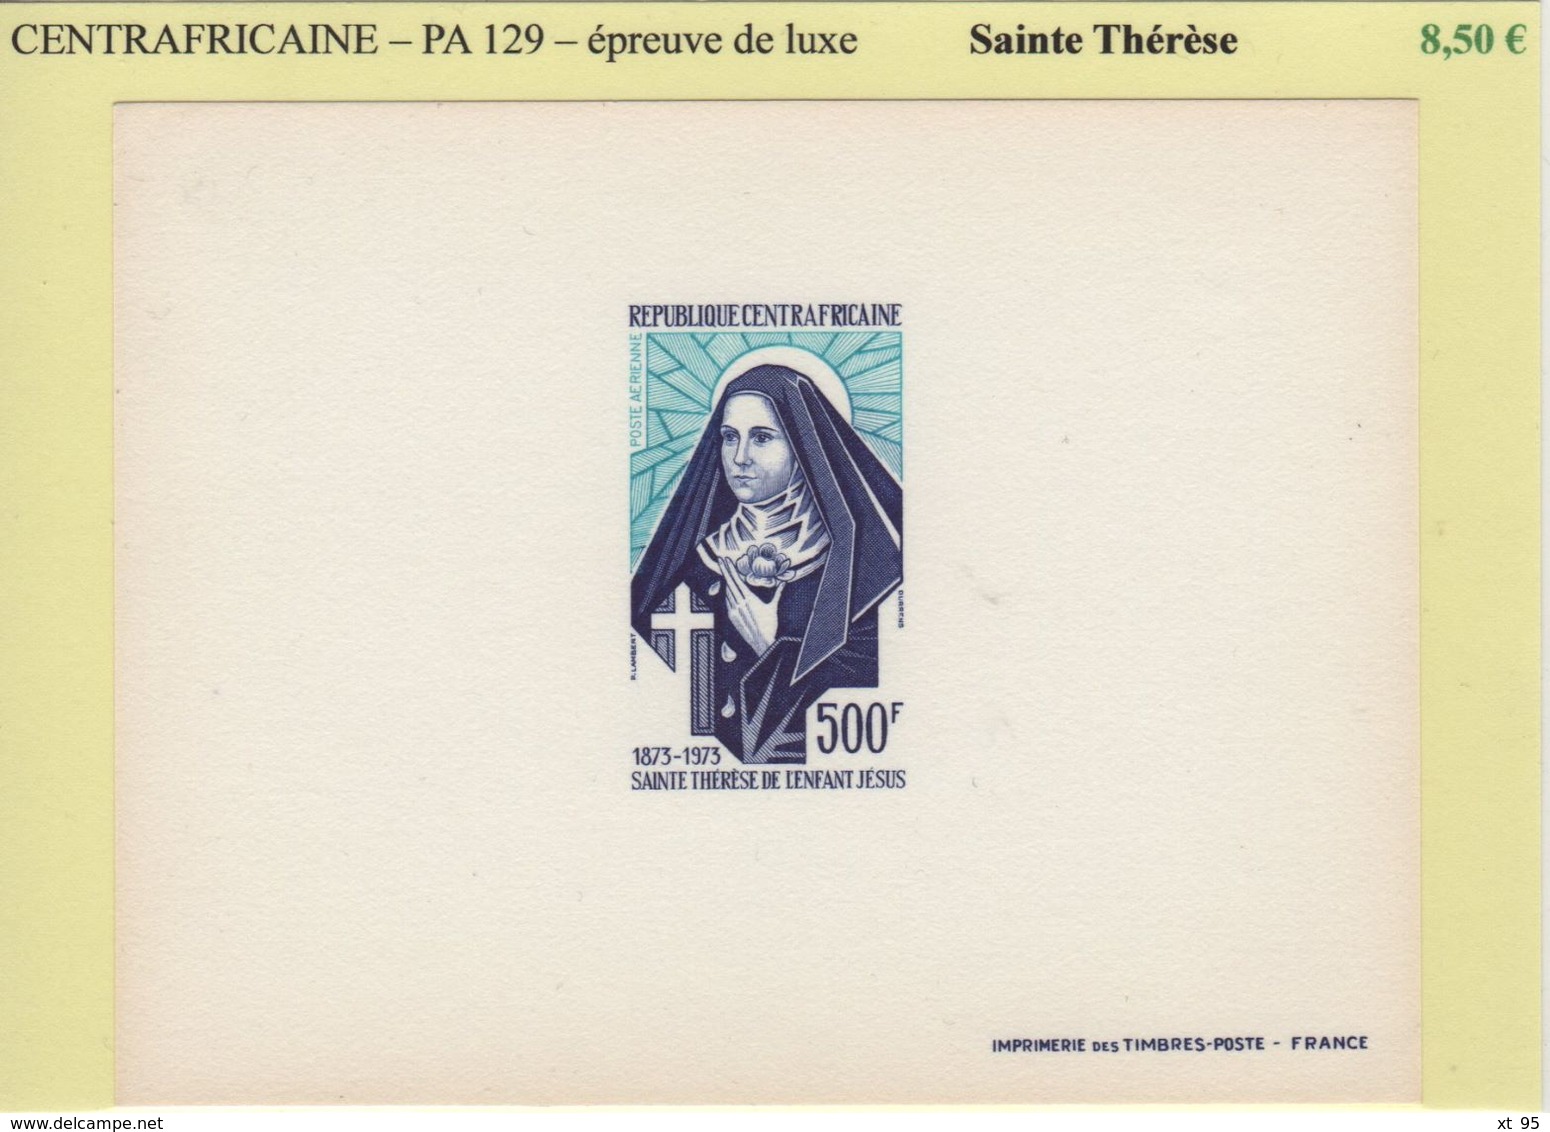 Centrafricaine - Epreuve De Luxe - PA129 - Sainte Therese - Central African Republic